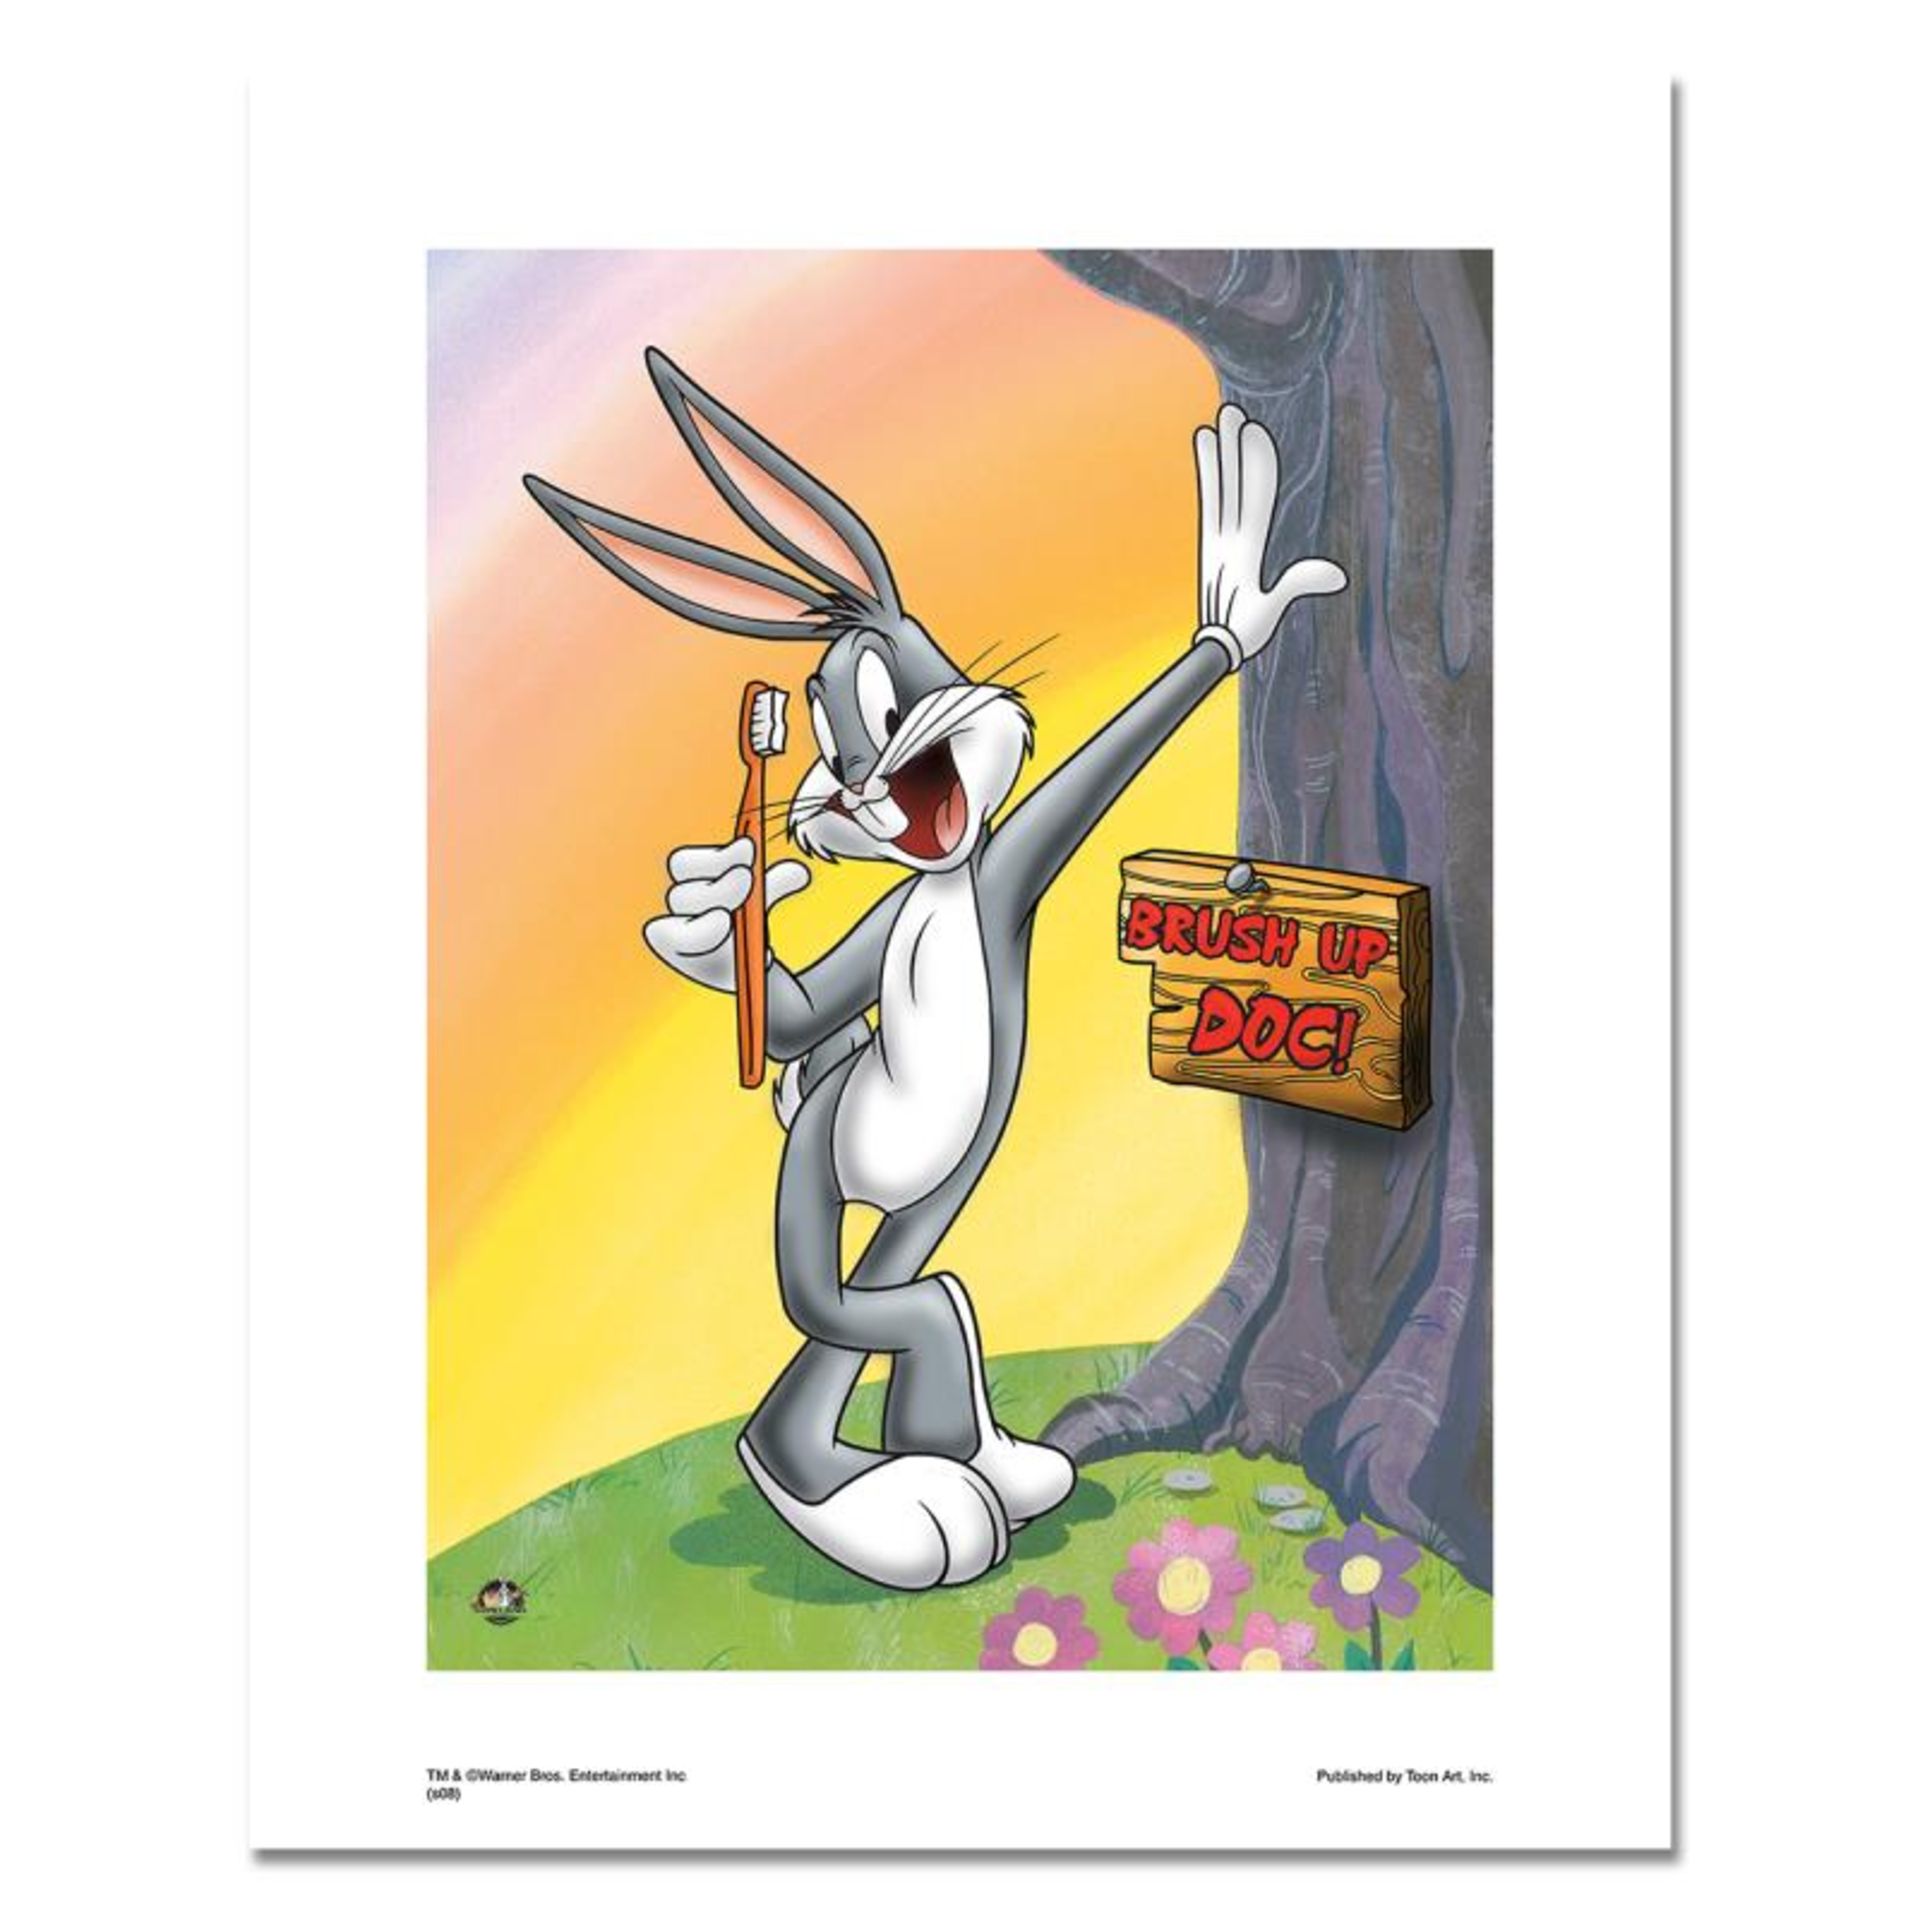 Looney Tunes, "Brush up Doc" Numbered Limited Edition with Certificate of Authen